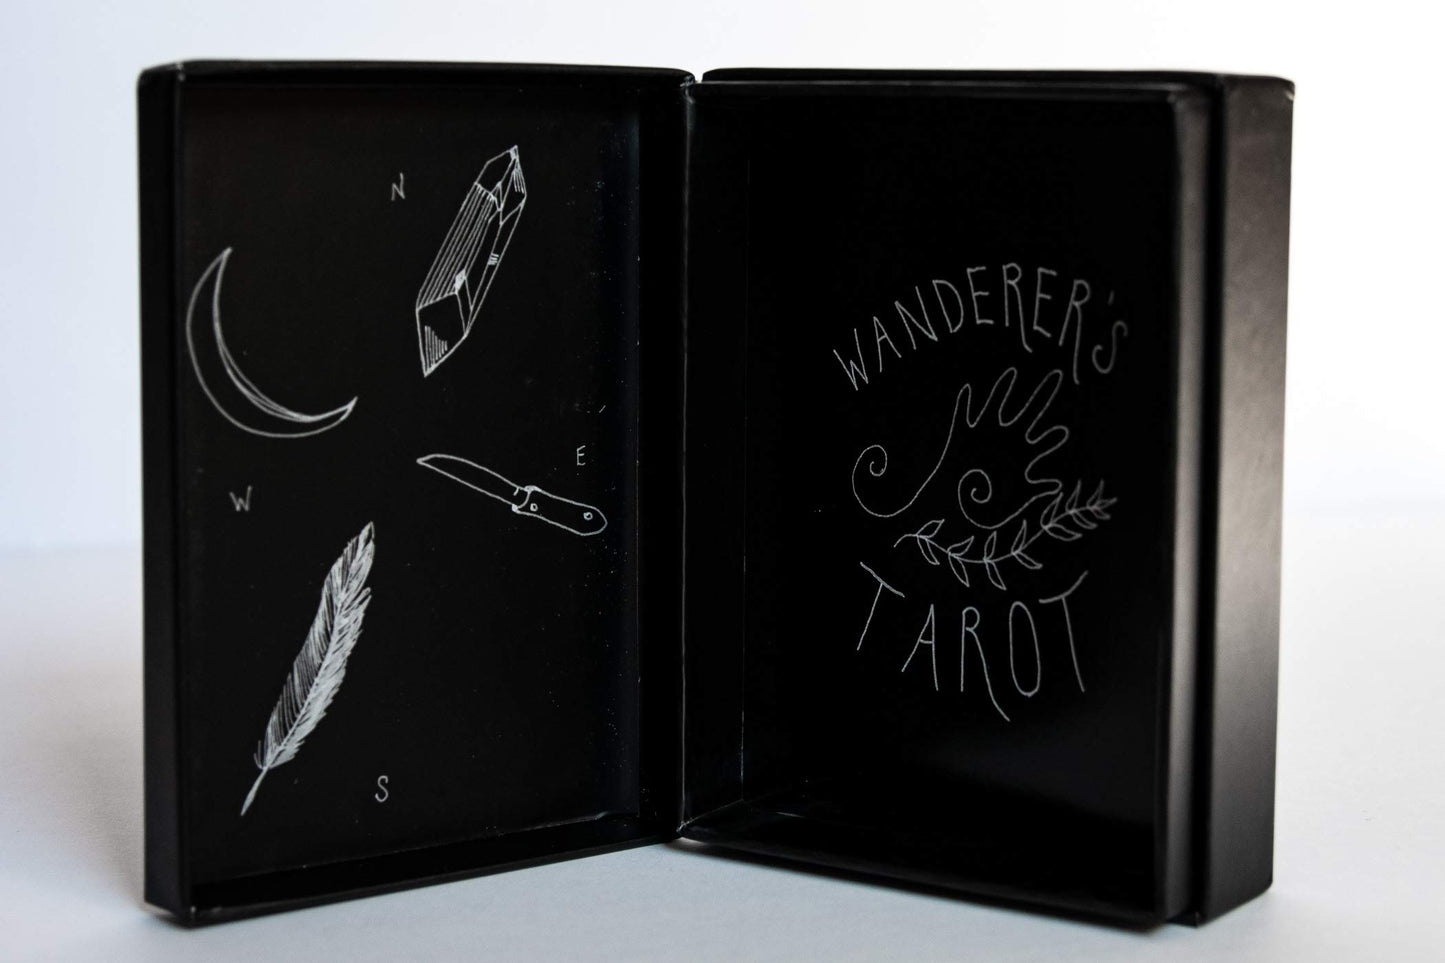 Wanderer's Tarot: 78 Cards and Fold-out Guide - By Casey Zabala